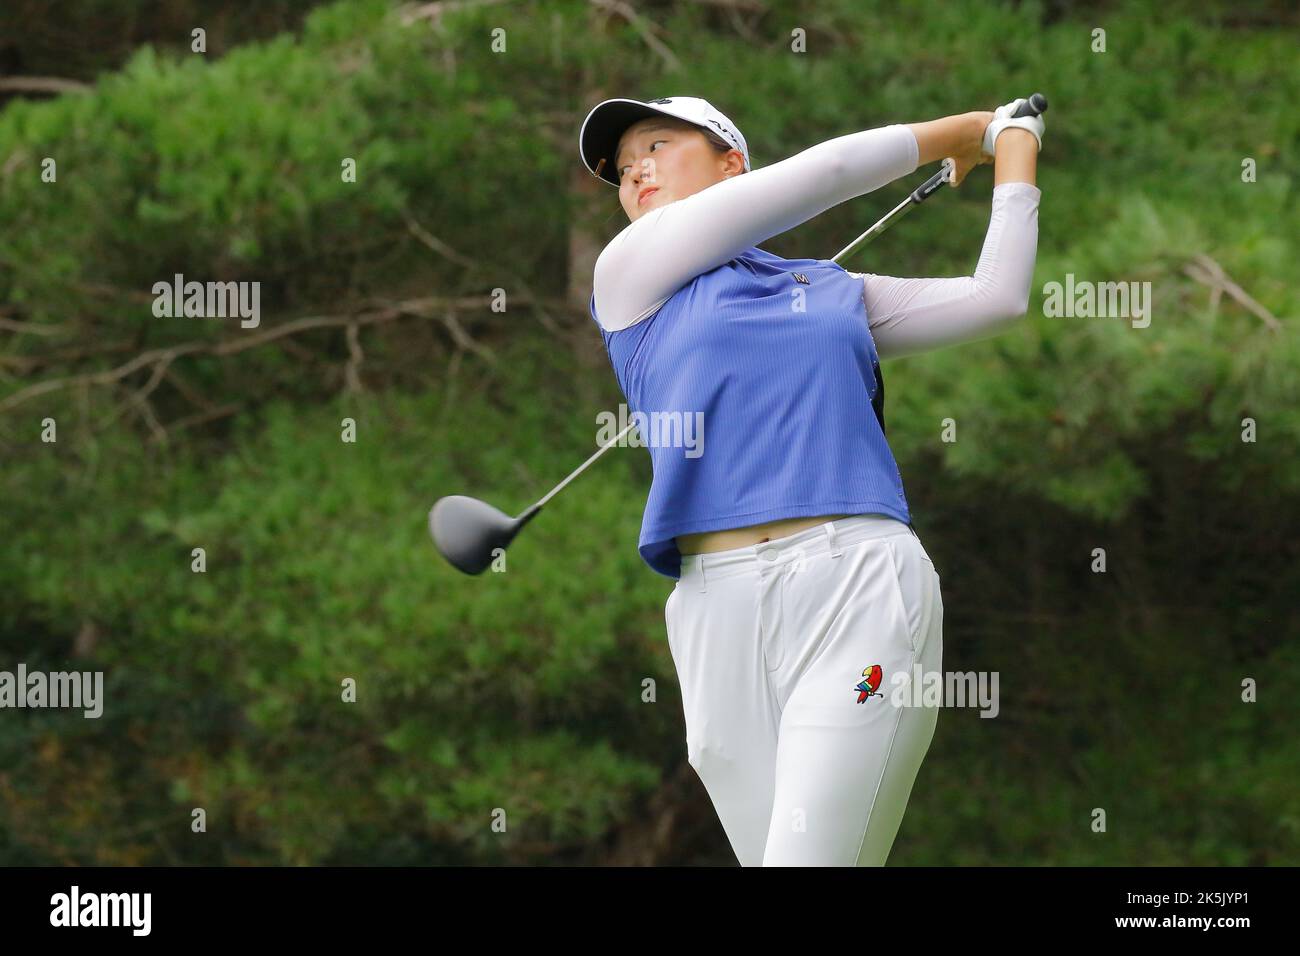 Aug 25, 2022-Chuncheon, South Korea-Chi Young Min action on the 2th hall during an Hanhwa Classic 2022 Round 1 at Jade Palace Golf Club in Chun Cheon, South Korea. Stock Photo